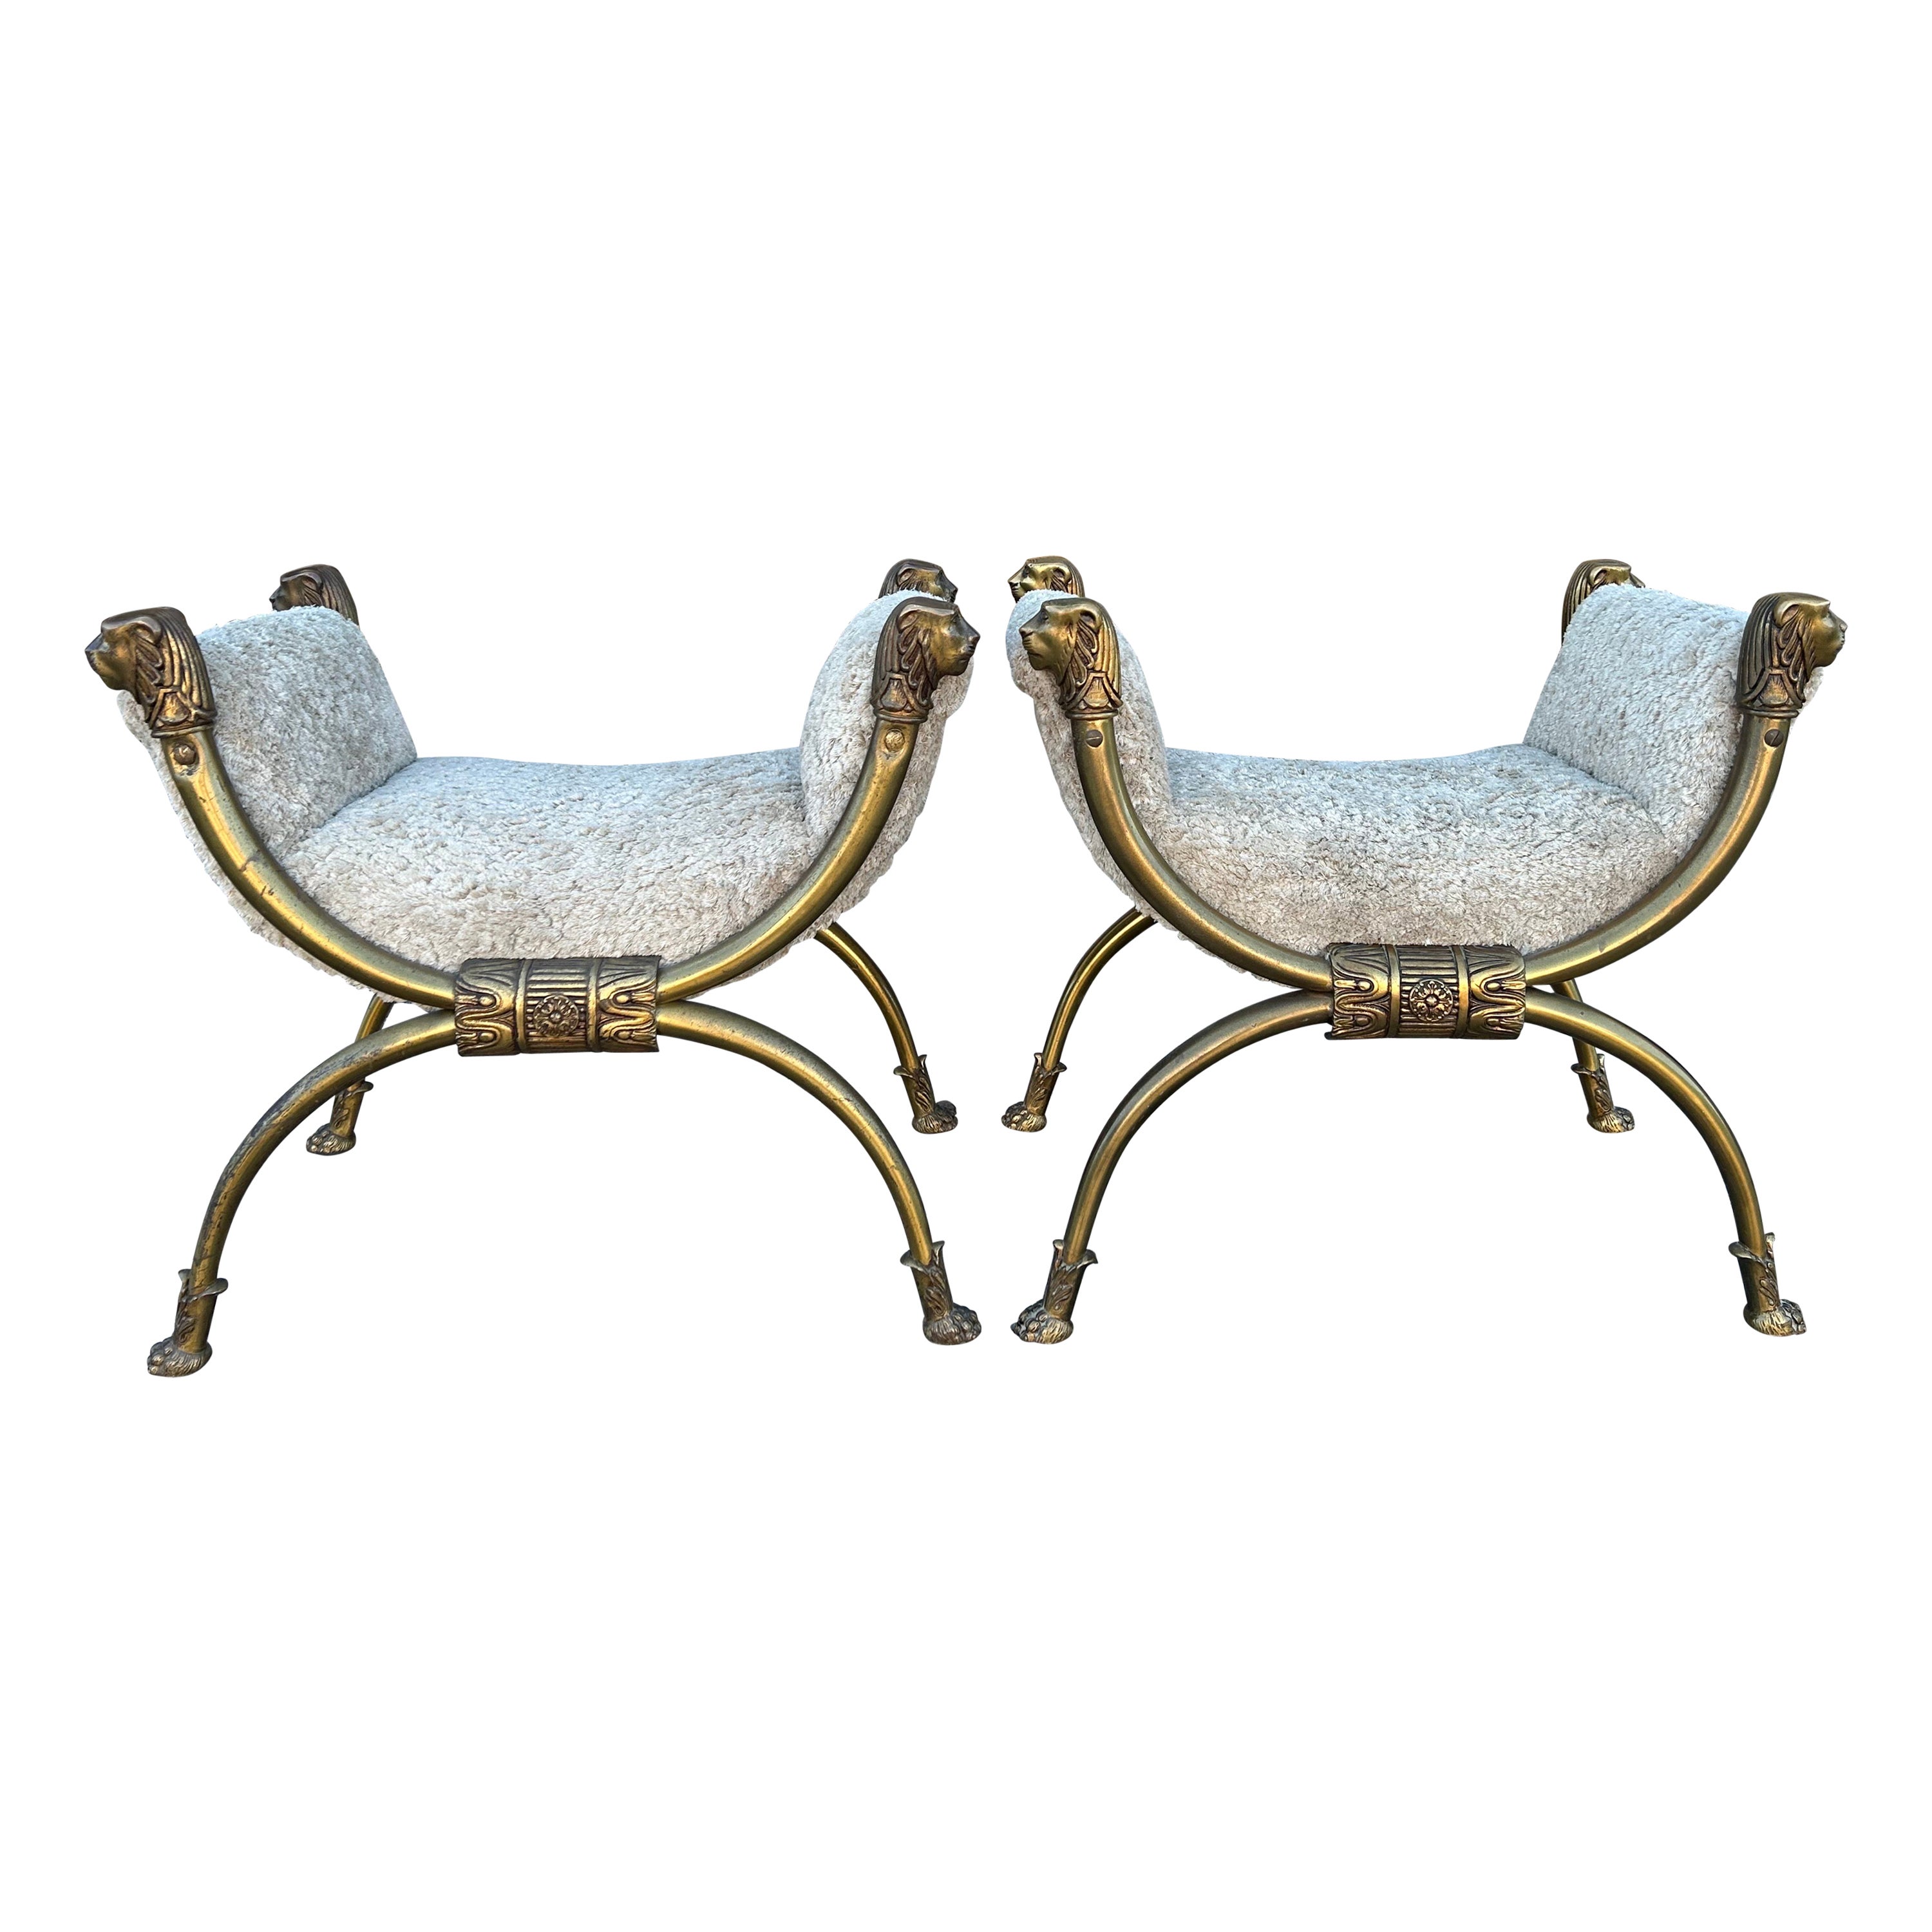 Pair Of Italian Brass Curule Benches With Lions Heads